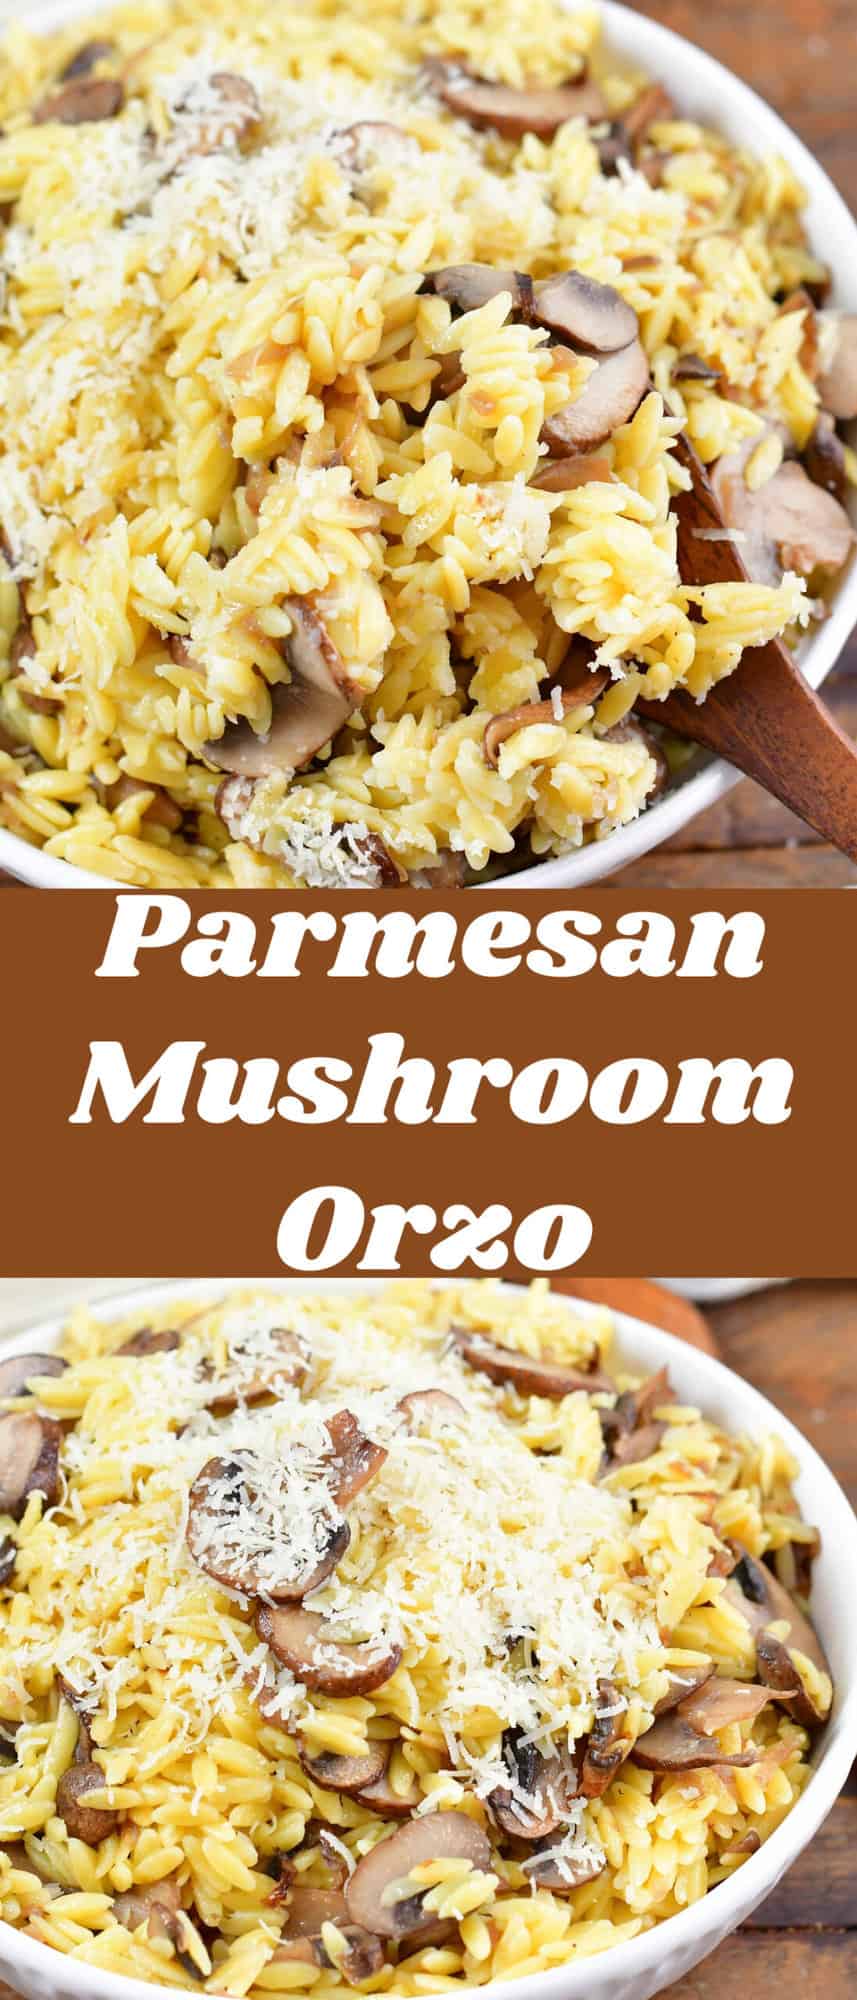 collage of two closeup images of mushroom parmesan orzo and title.